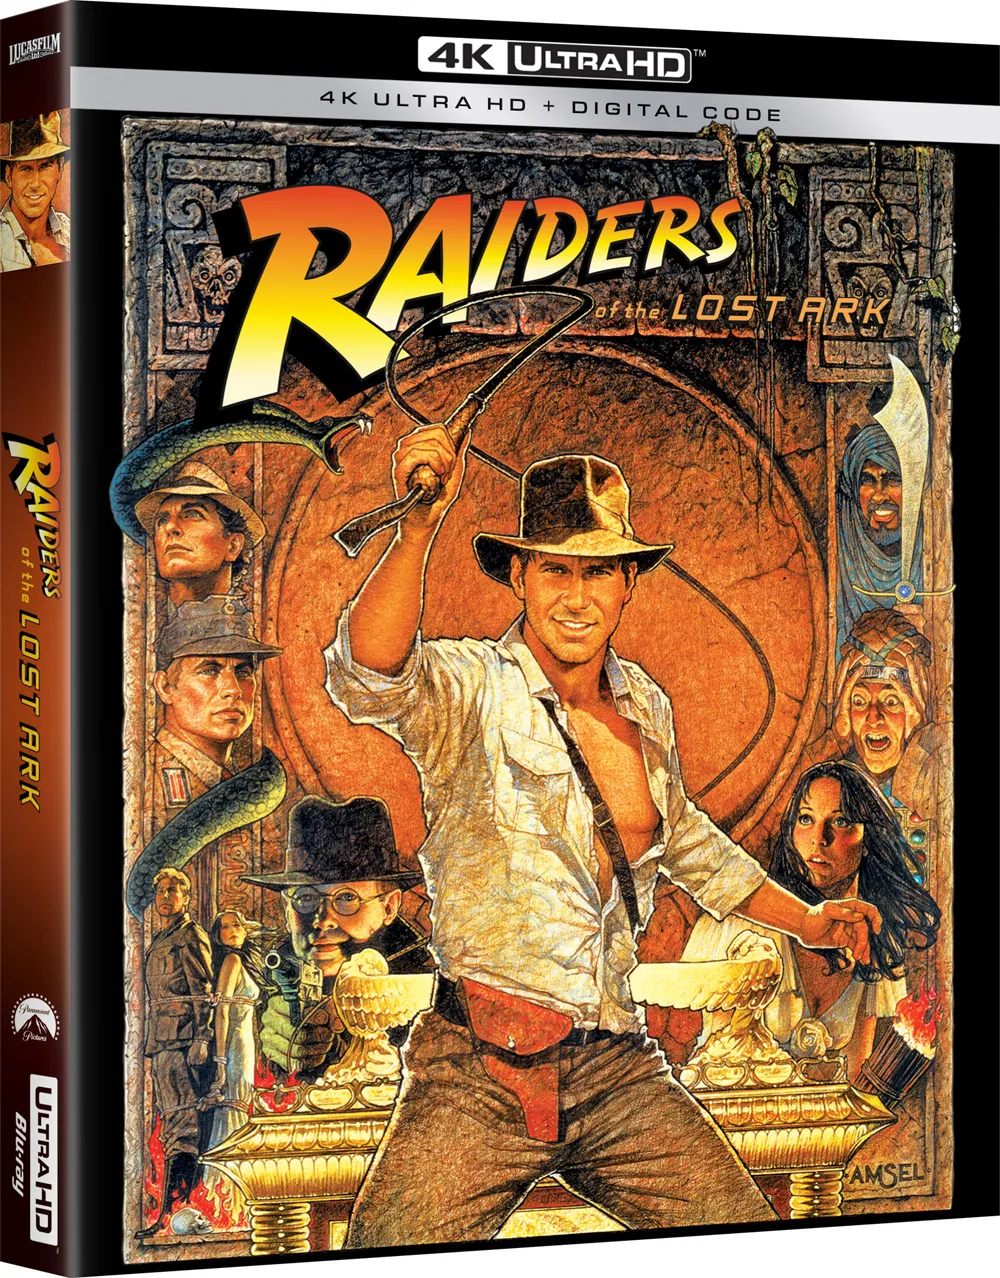 All Indiana Jones Movies Getting Individual 4K Blu-ray Releases